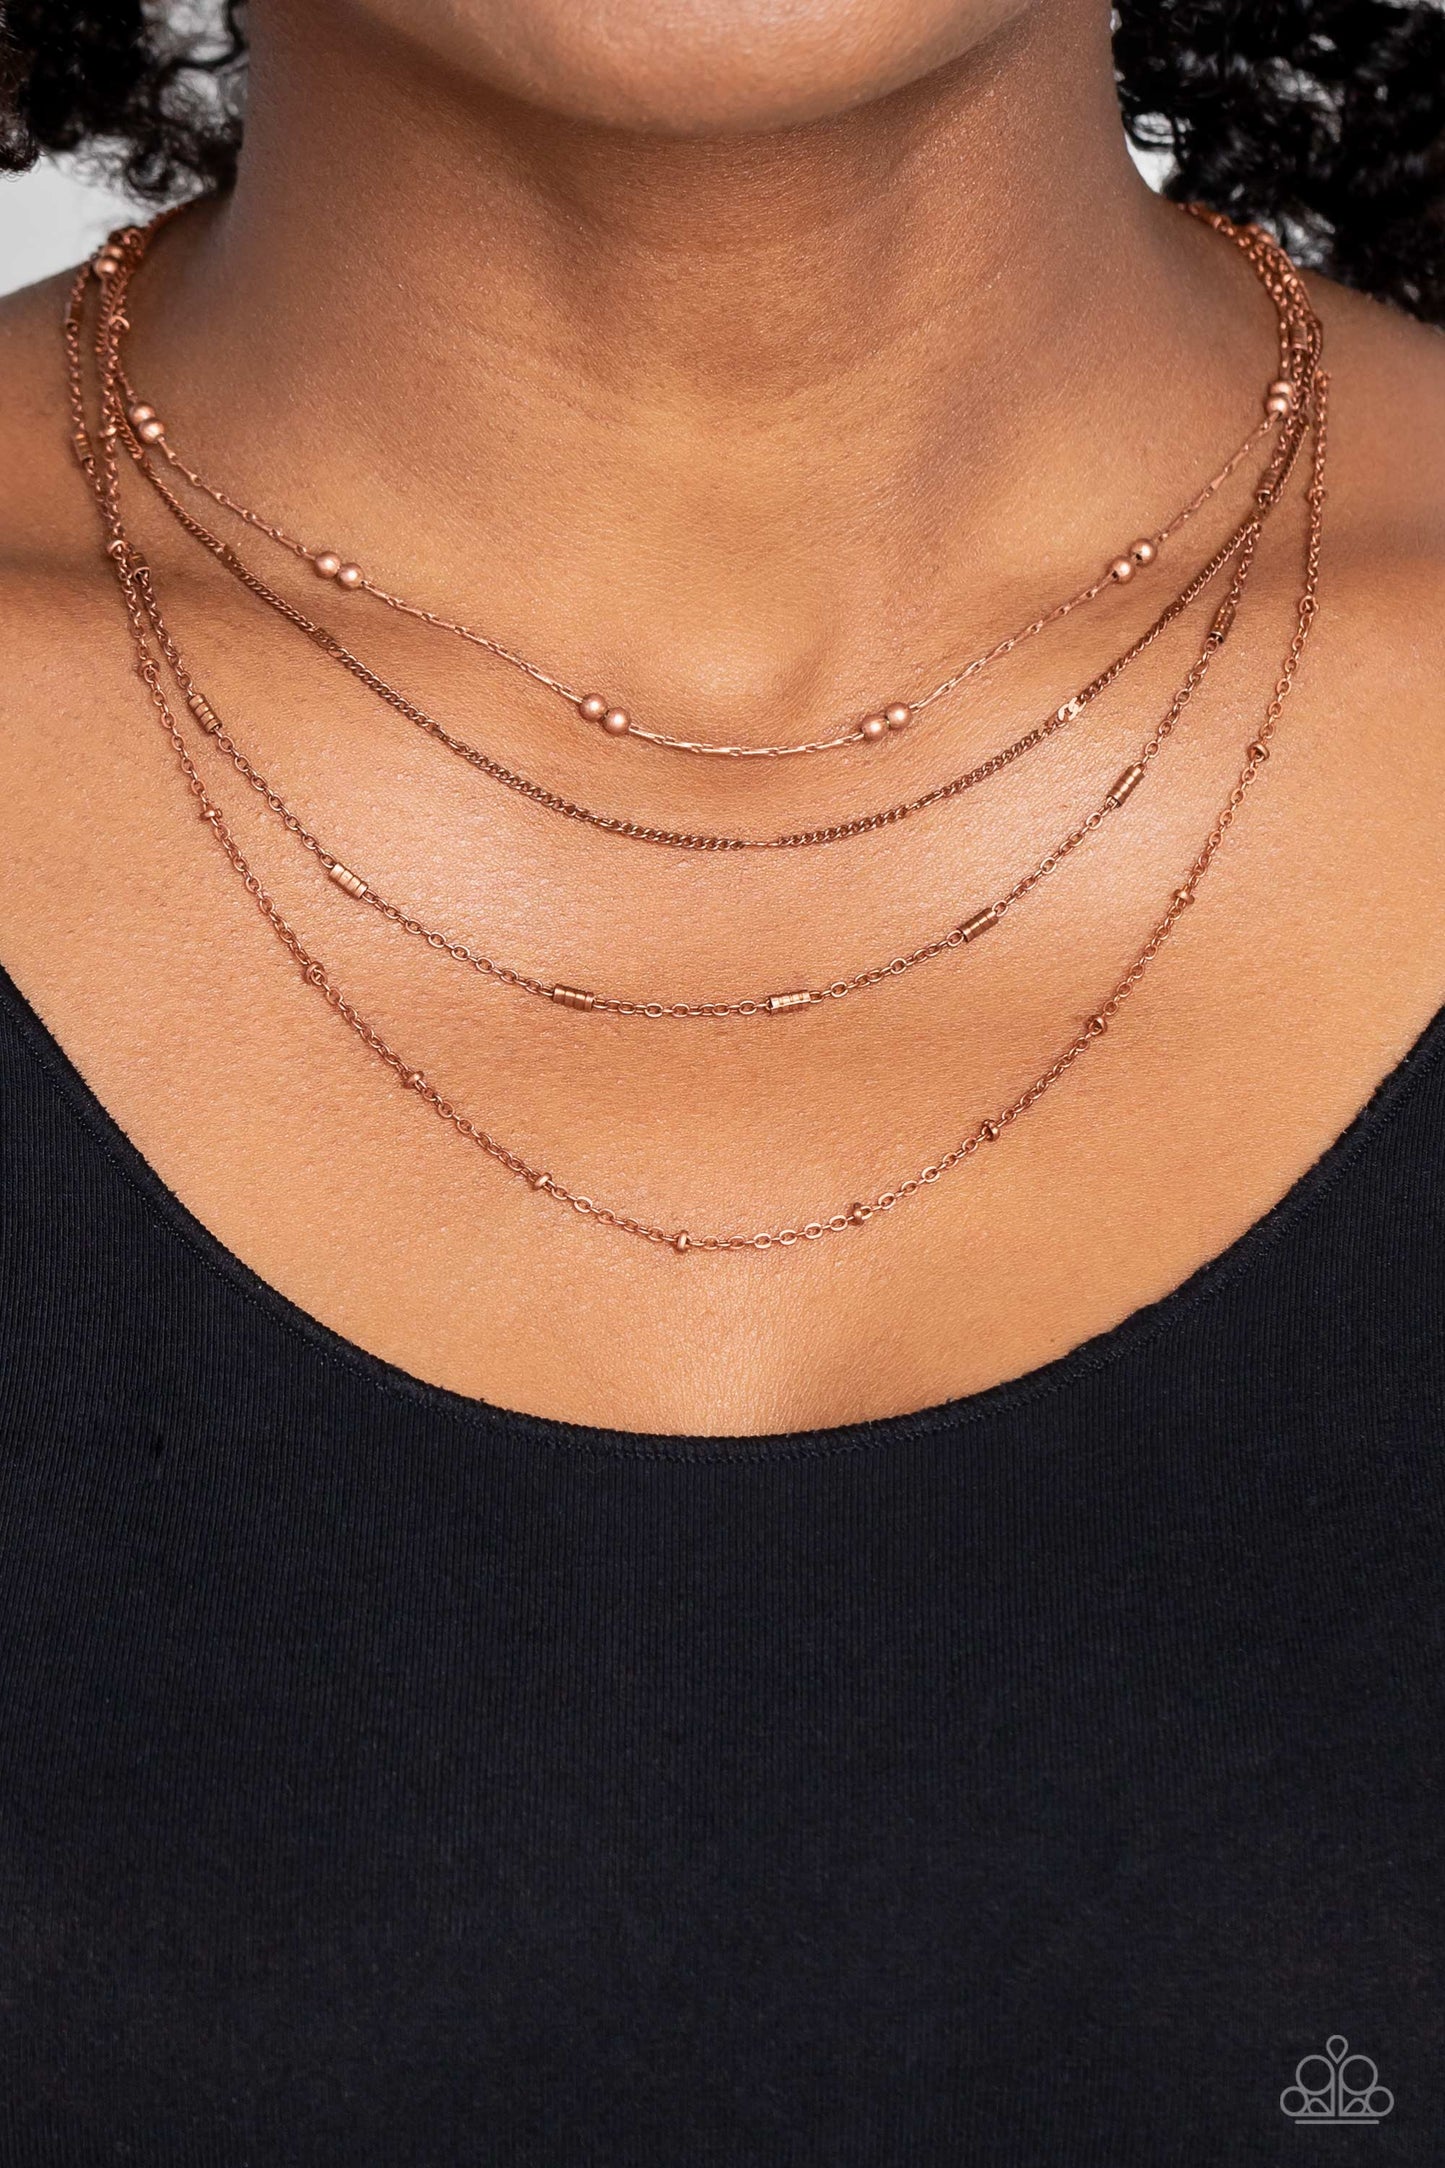 Paparazzi Necklaces - Studded Shimmer - Copper